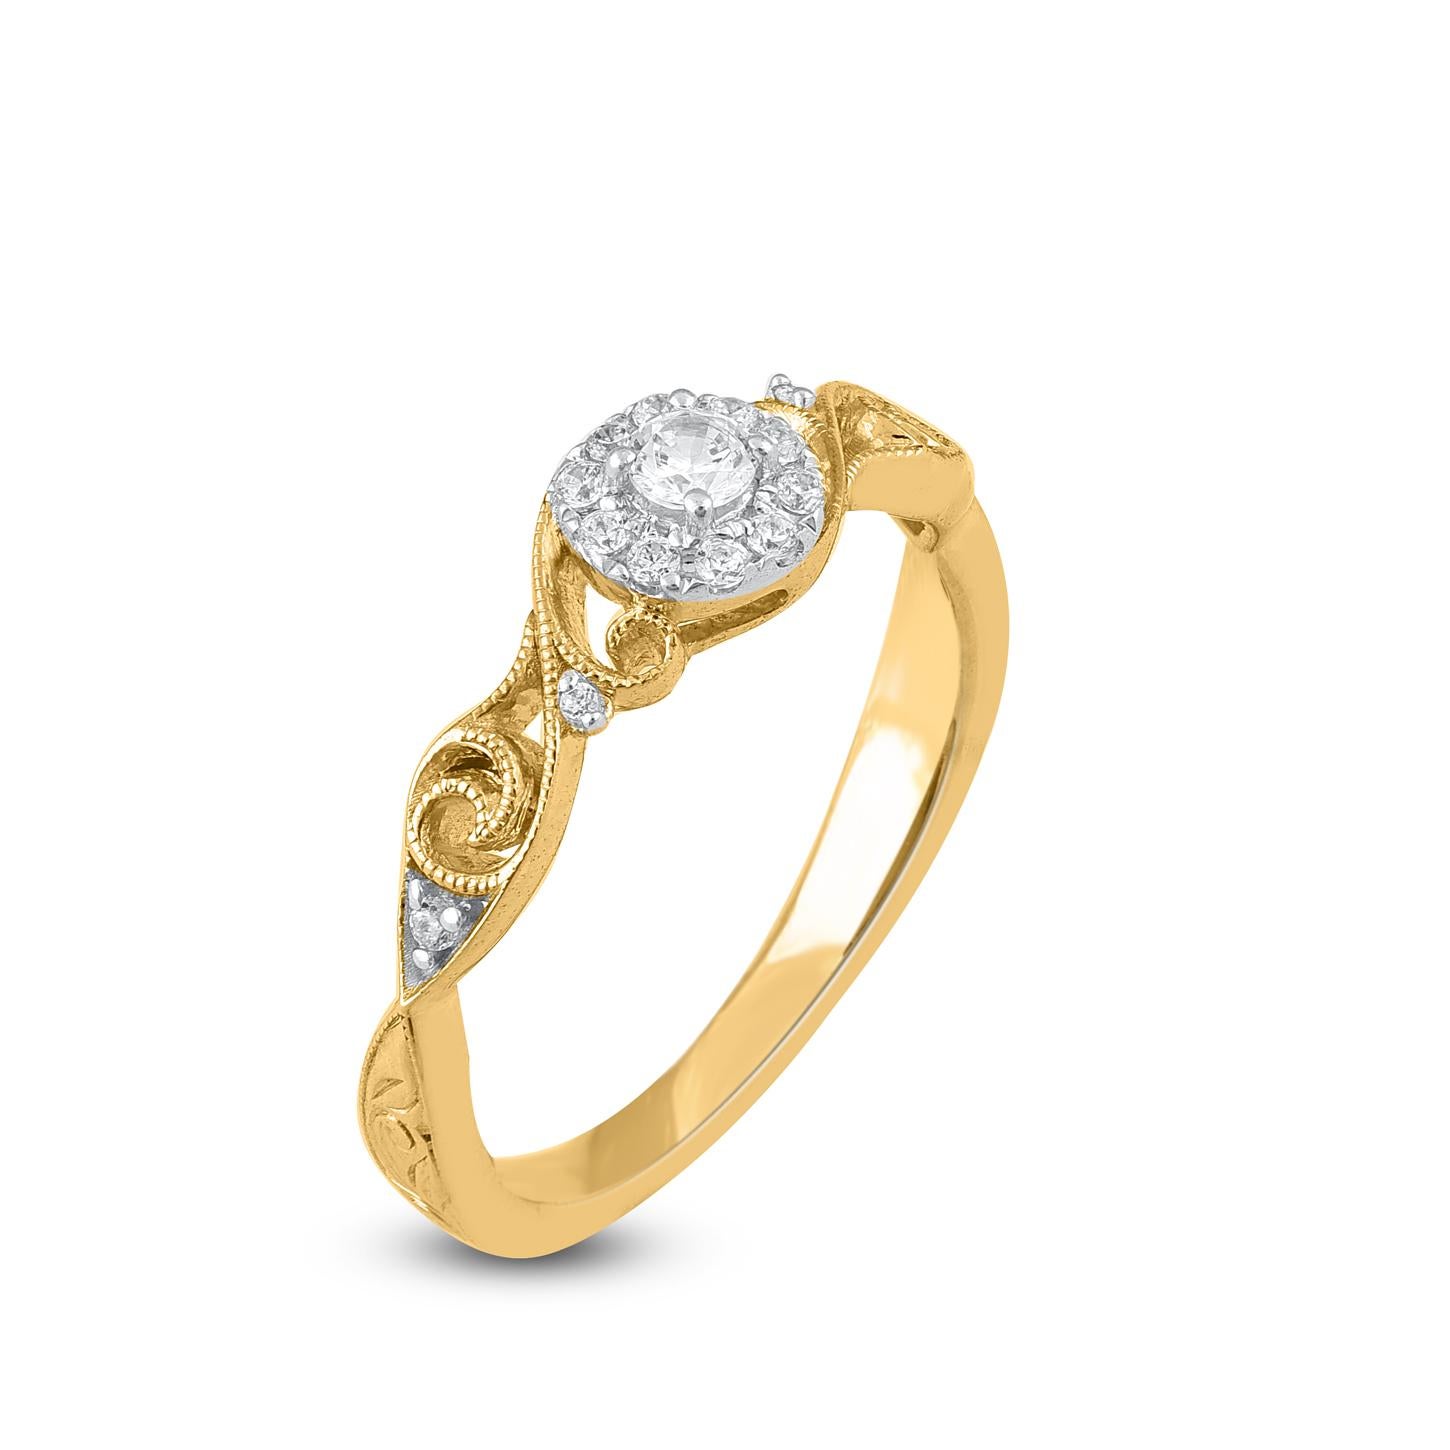 Contemporary TJD 0.21 Carat Brilliant Cut Diamond 14KT Yellow Gold Vintage Engagement Ring For Sale